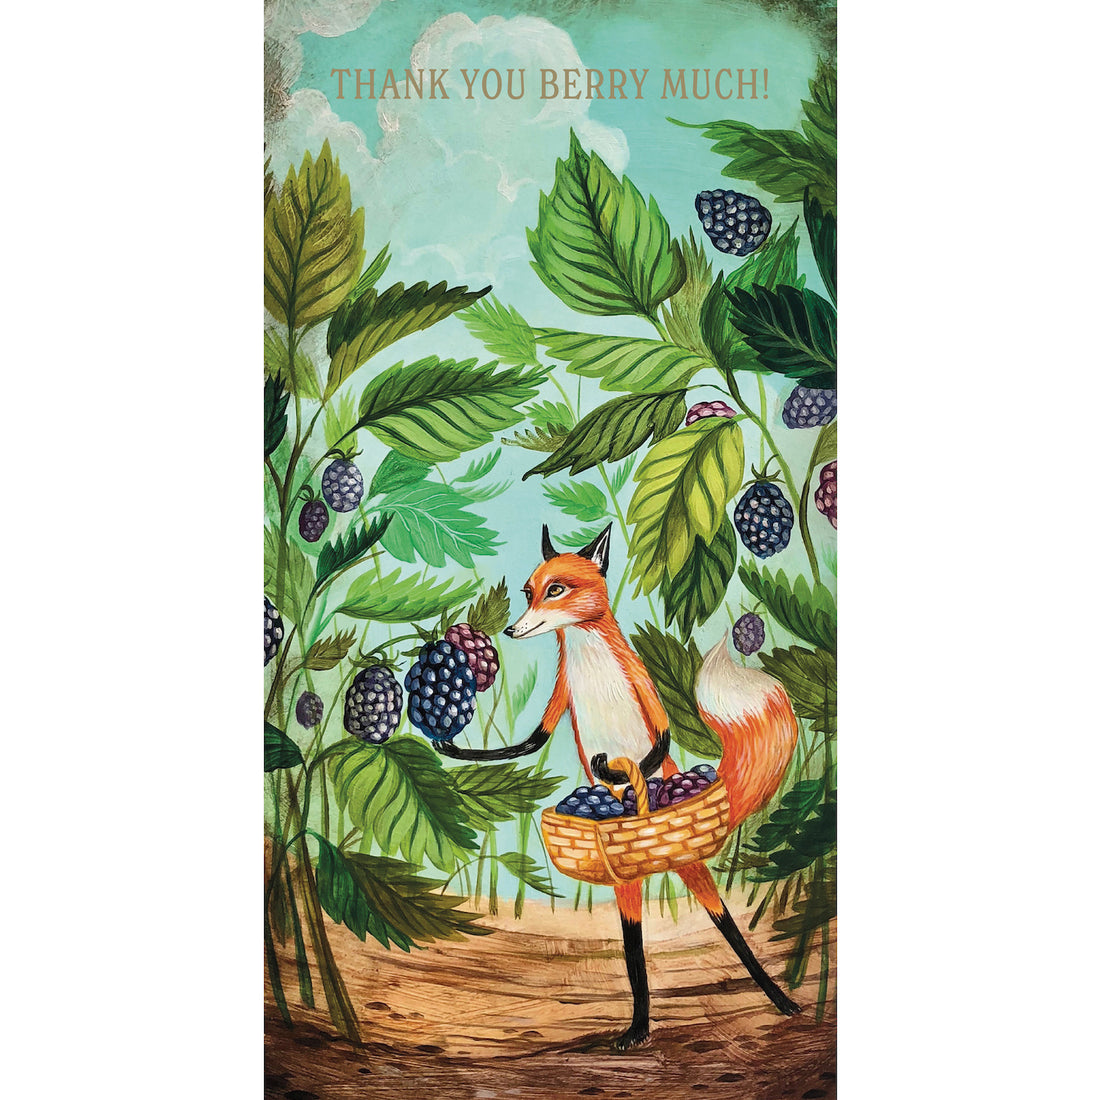 A whimsical illustration of a red and white fox gathering large blackberries into a basket under a cloudy blue sky, with &quot;THANK YOU BERRY MUCH!&quot; printed in gold across the top of the card.